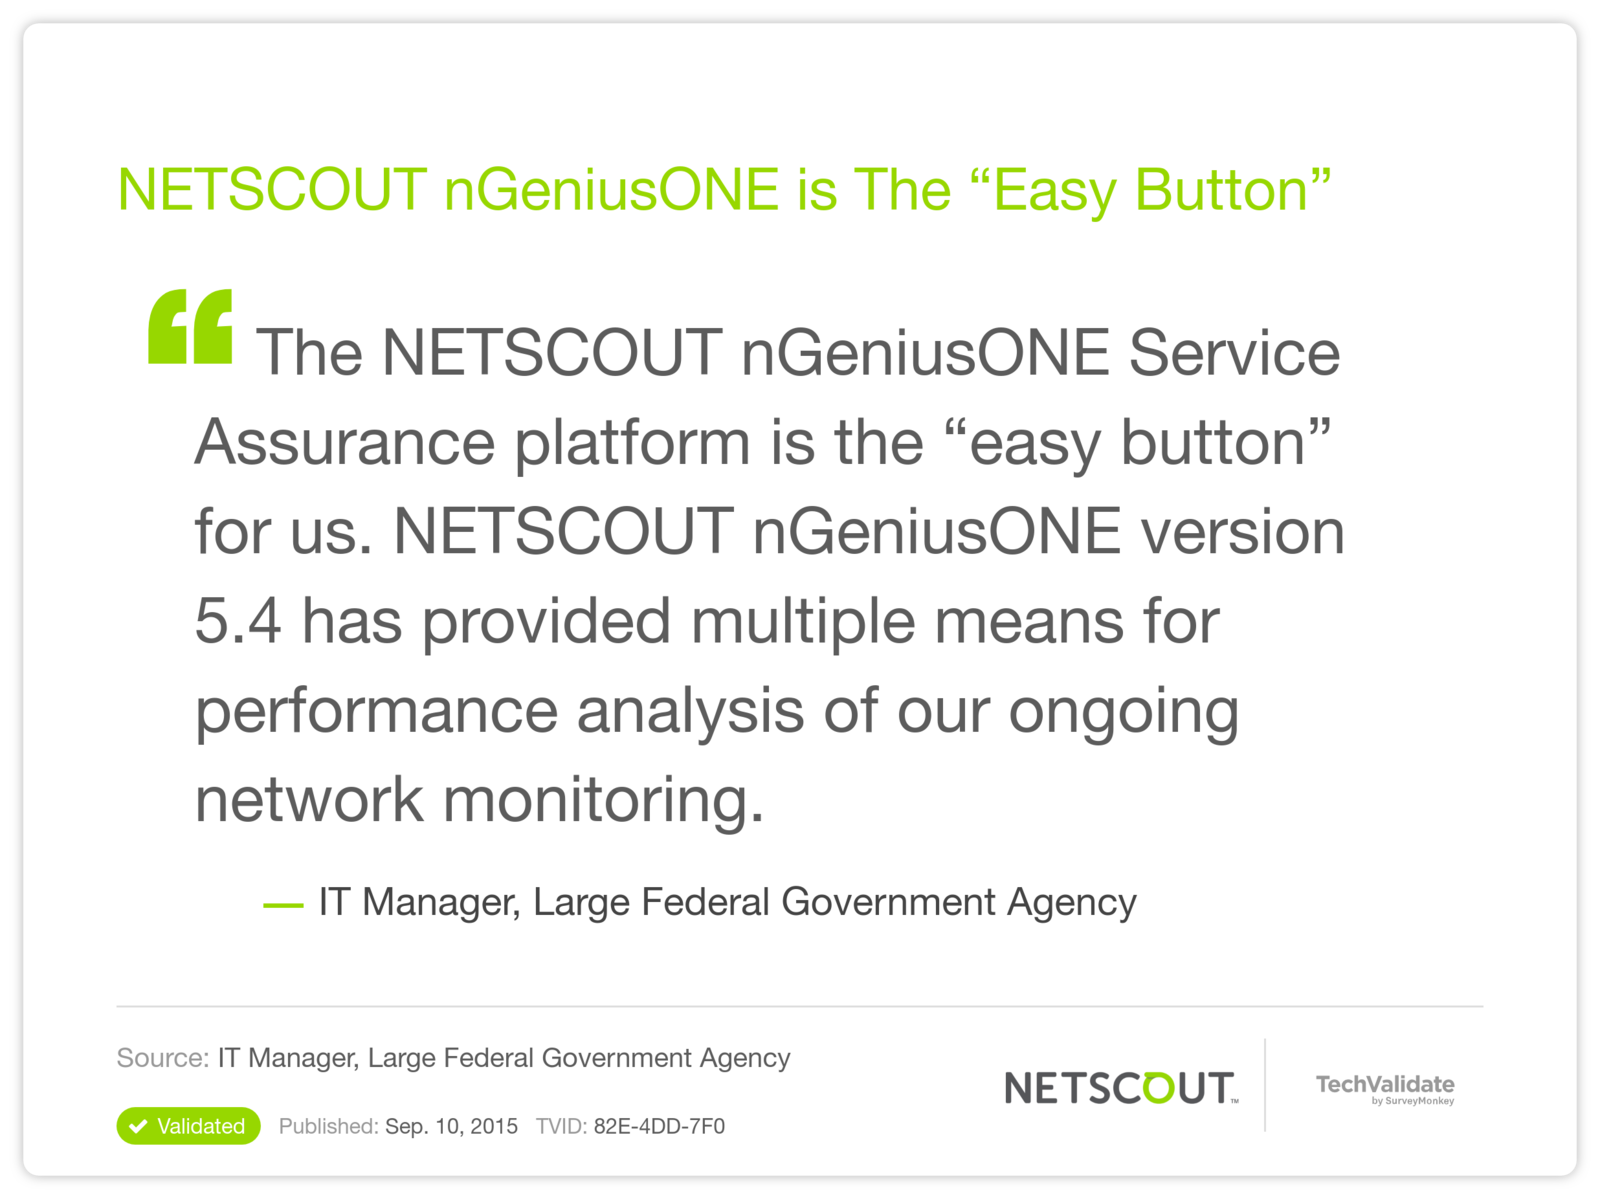 NETSCOUT nGeniusONE is The "Easy Button"